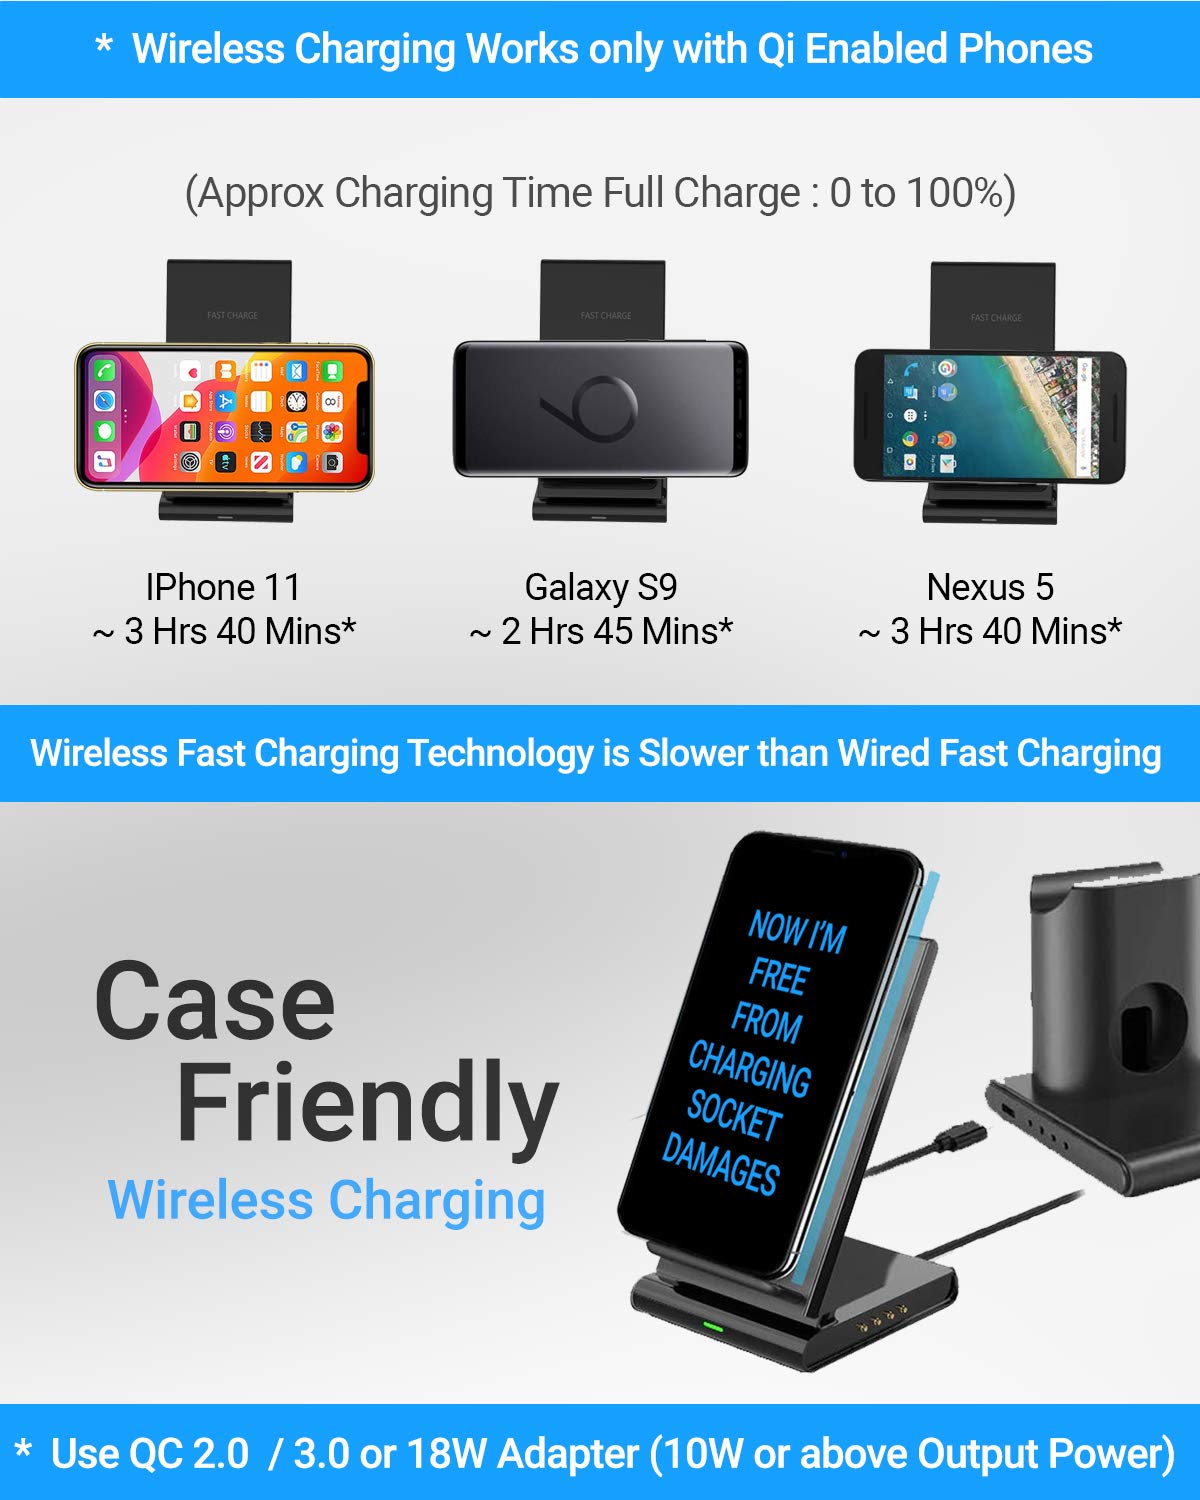 Beckh Field 0860 3-in-1 Charging Dock, 10W Wireless Charger for Phones + Wired Dock for Apple Watch & AirPods for iPhone